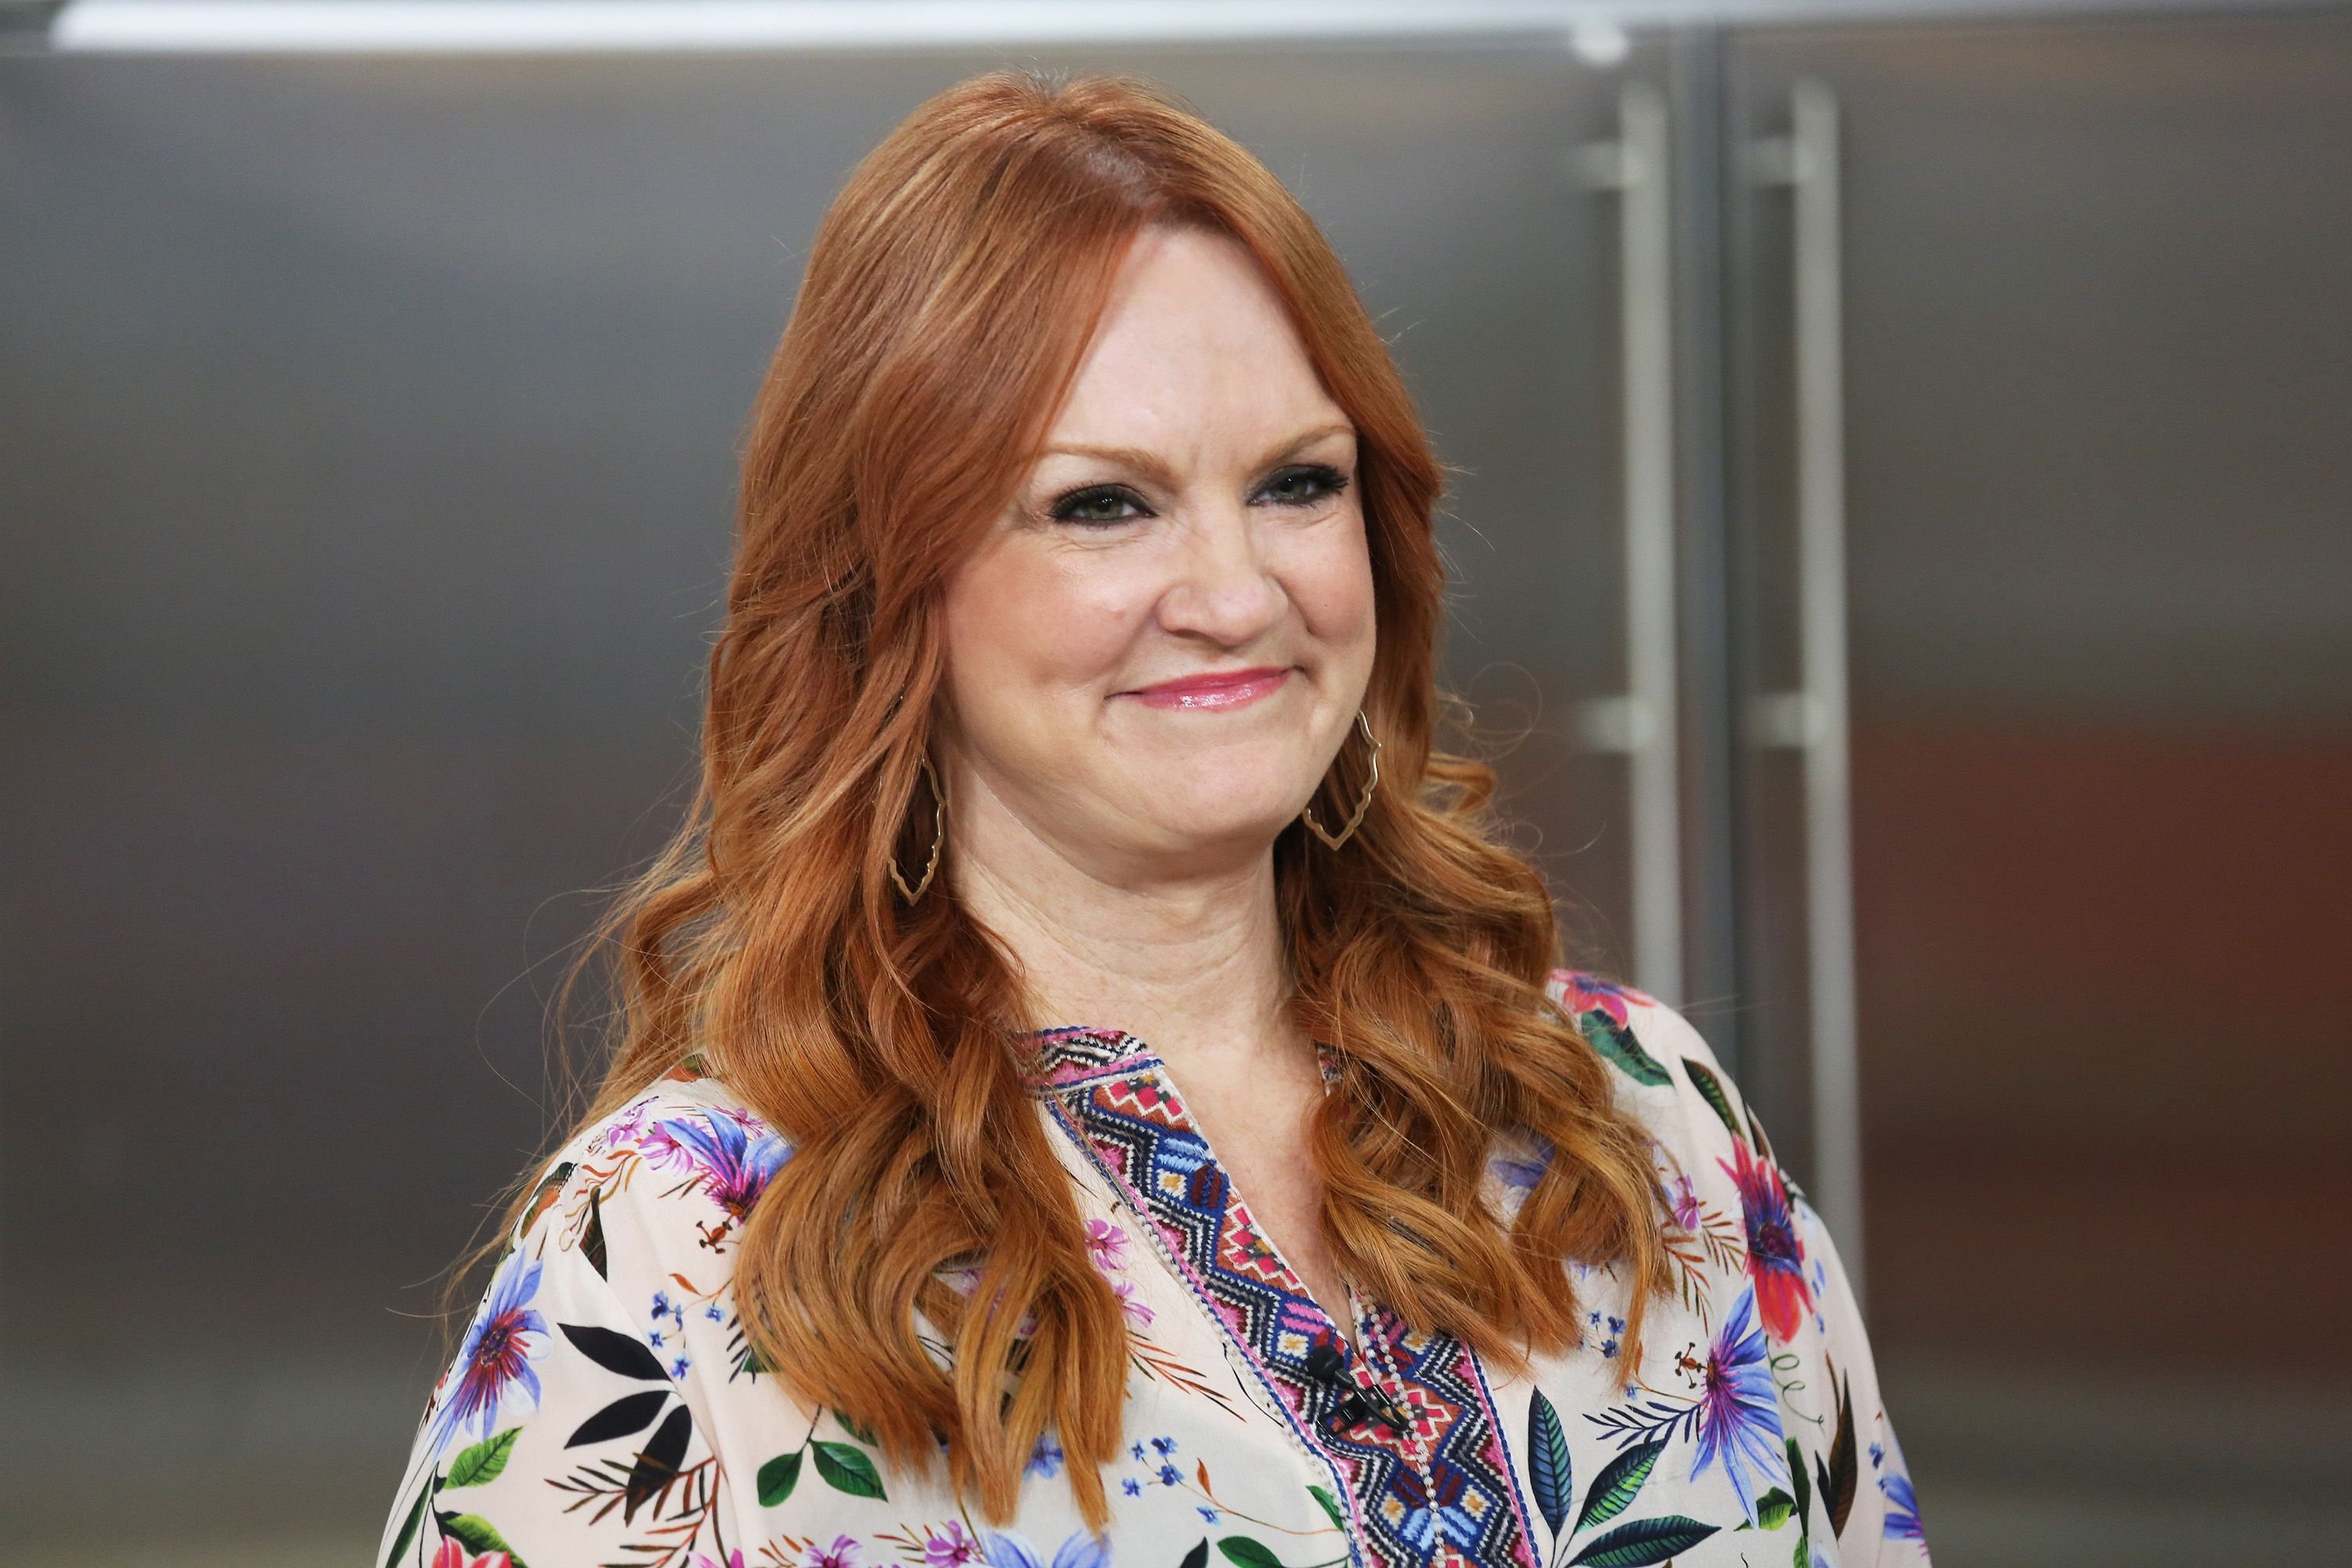 Ree Drummond at "Today" - Season 68 on Tuesday October 22, 2019 | Photo: Getty Images